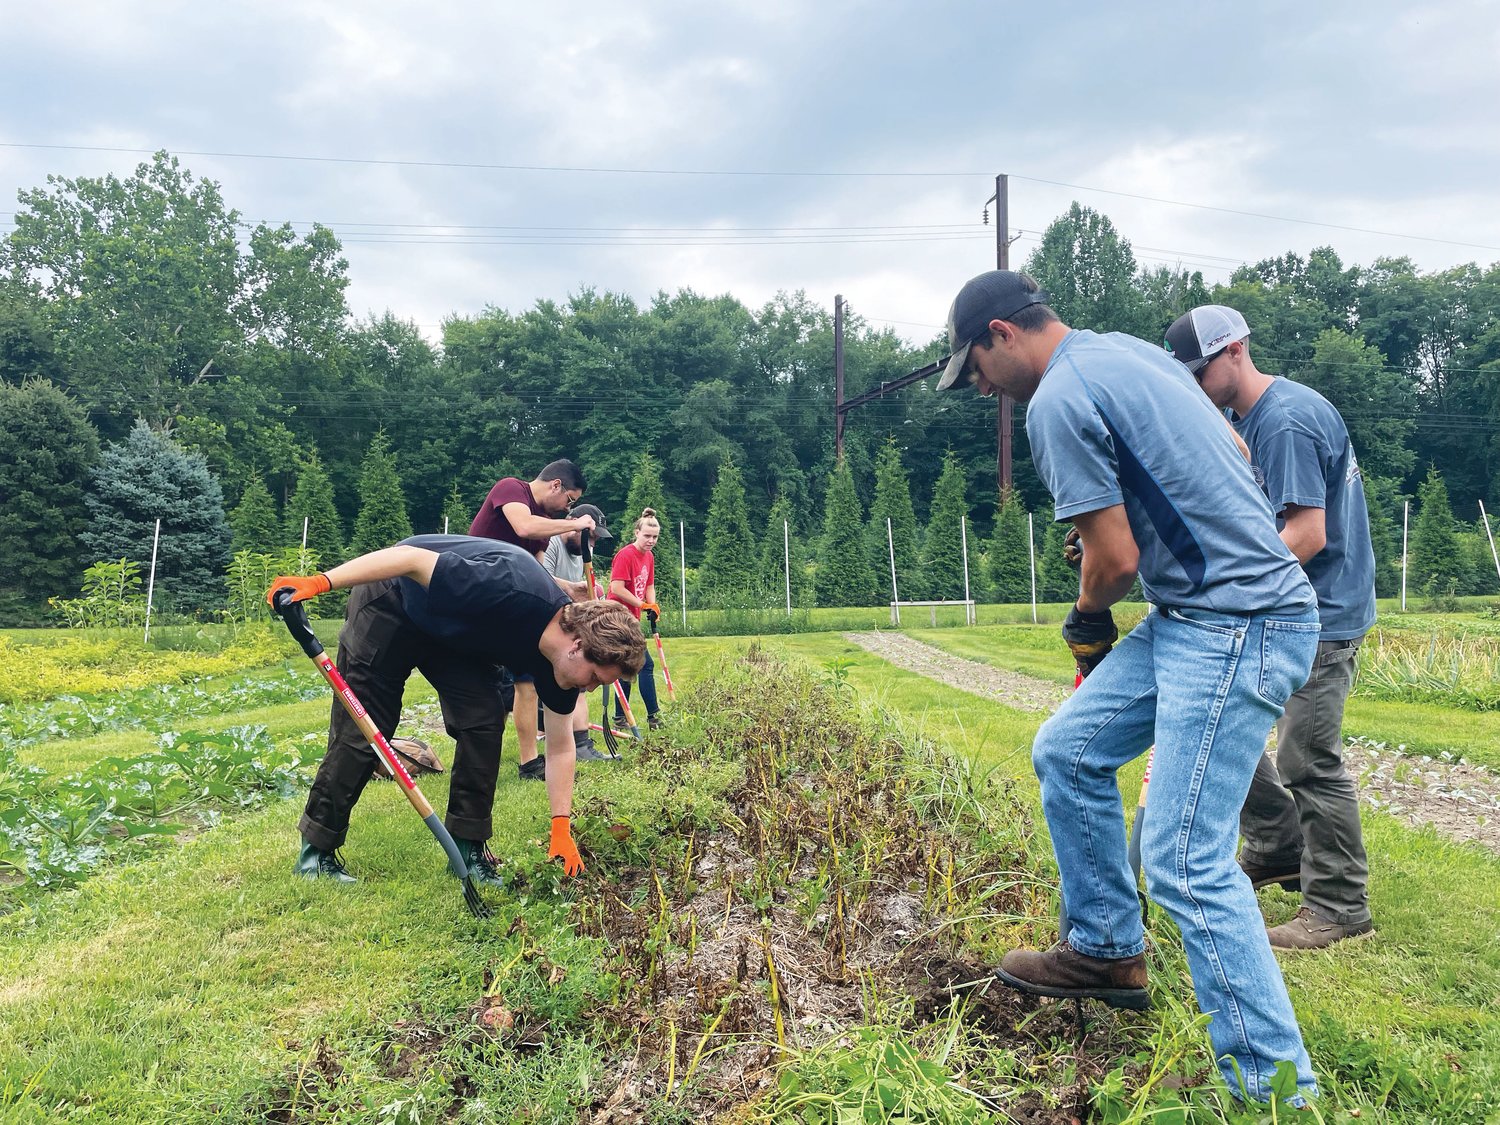 Delaware Valley University students recently spent a day harvesting produce at Promised Land Organic Farm in Yardley. All the food will be given to the Penndel Food Pantry in honor of Jackie Hansen, who, died suddenly and her husband intends to stop operating the farm.